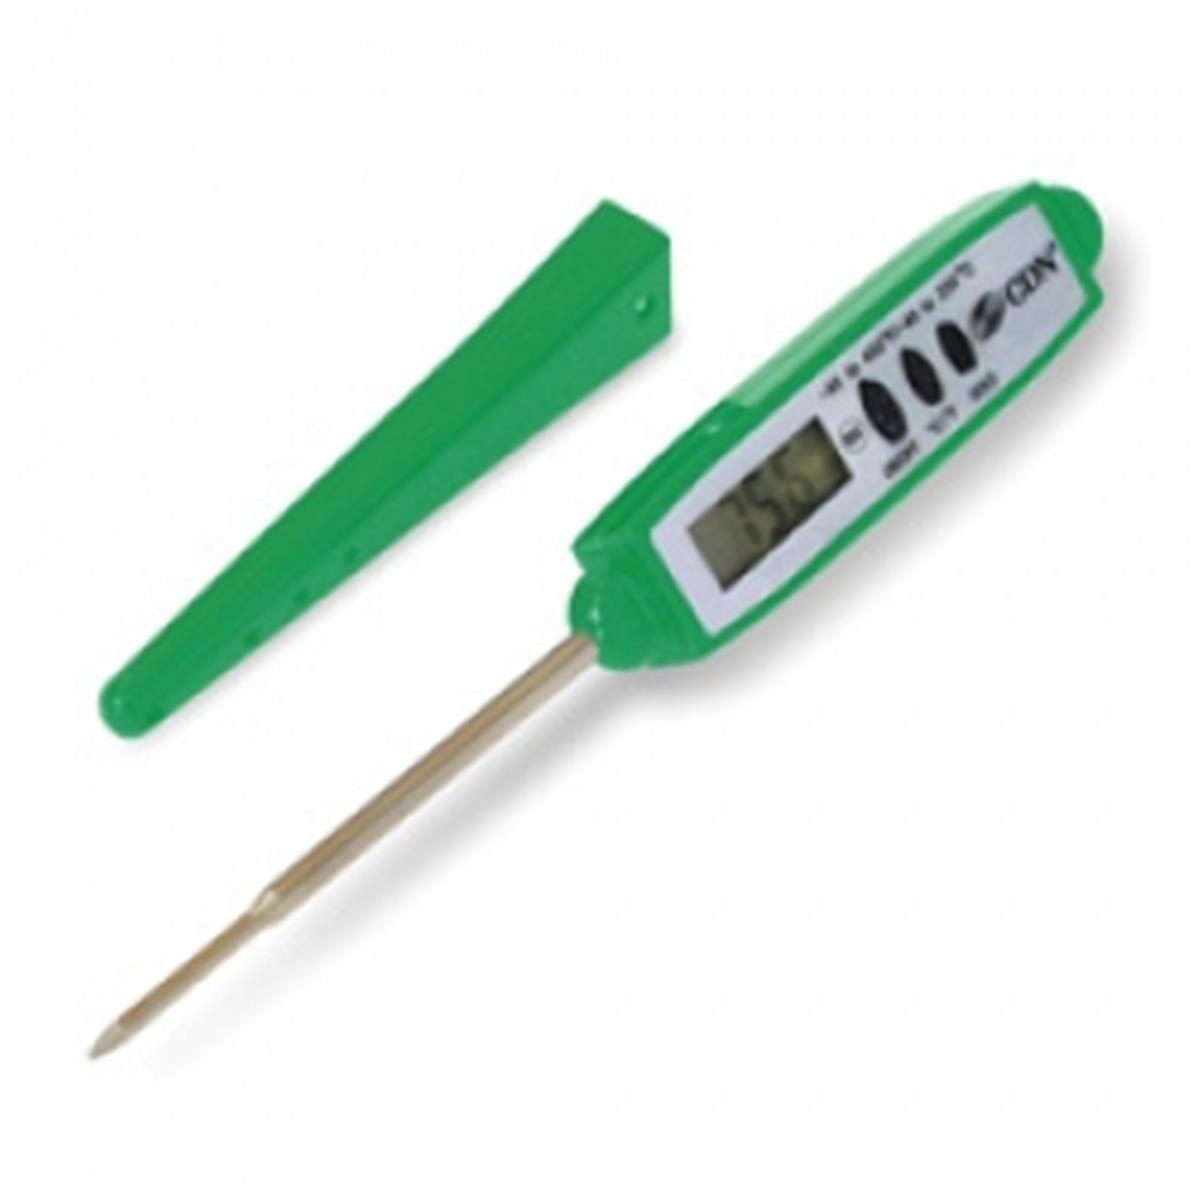 Dt450x-green Procreate Waterproof Pocket Thermometer - Green